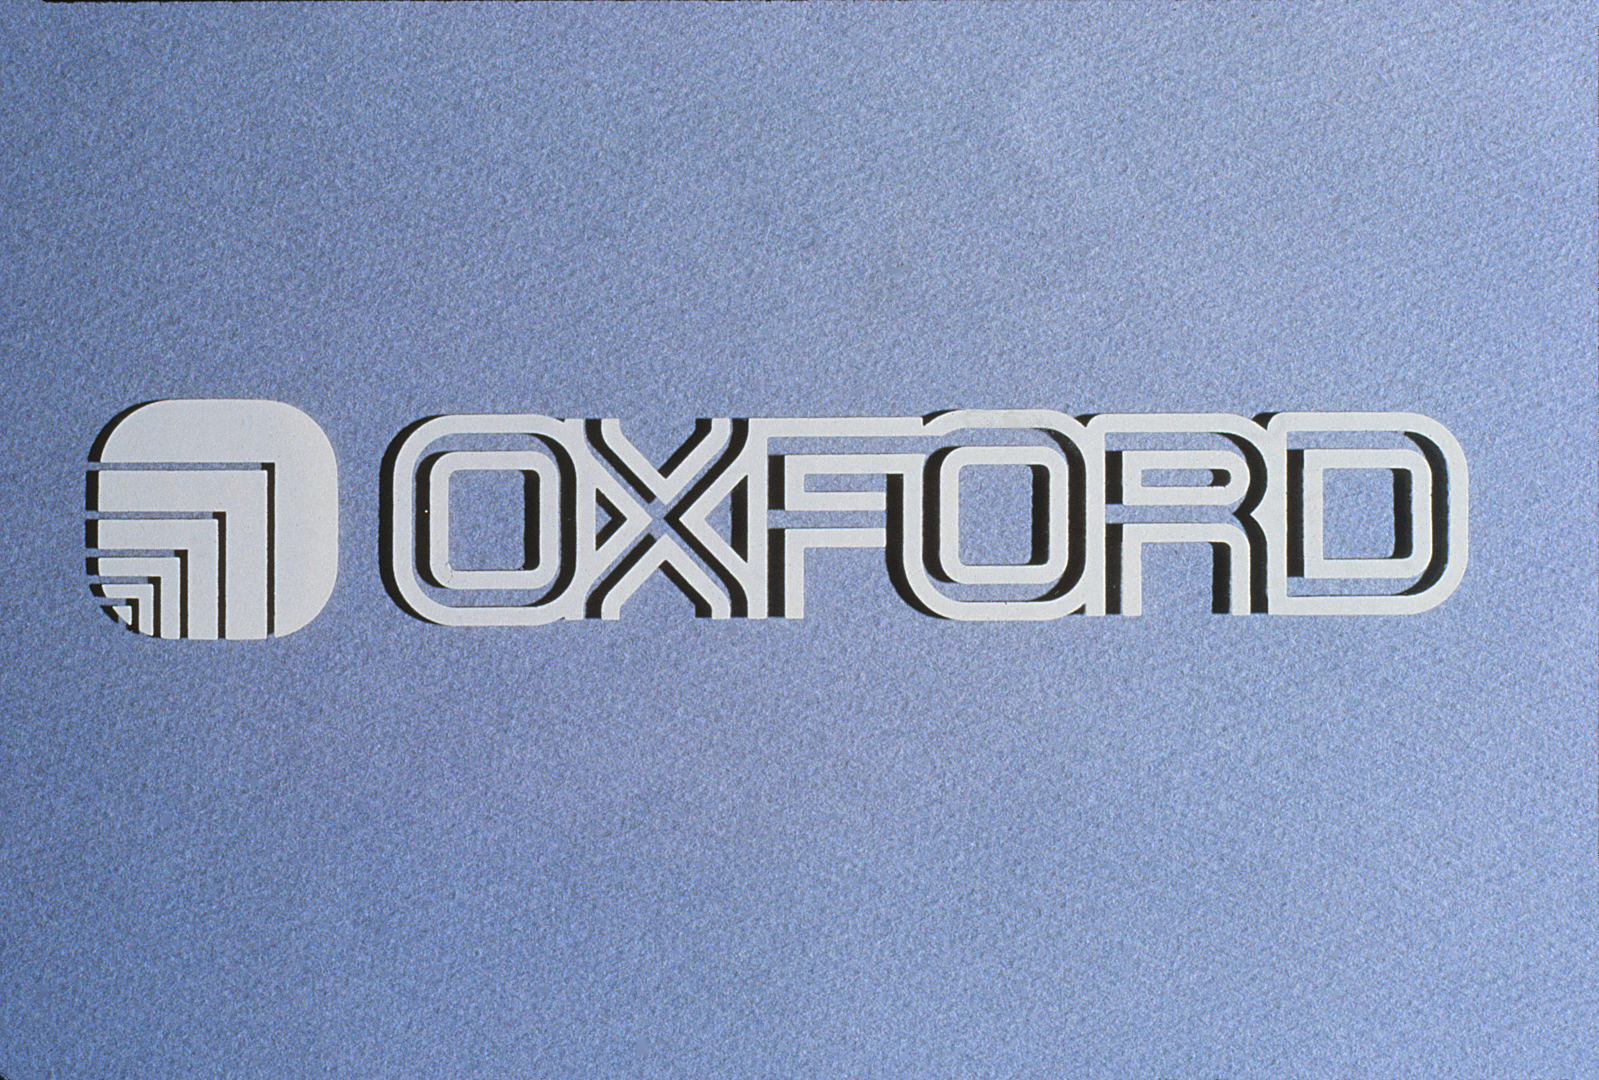 The raised Oxford logo and typeface as it looks on a wall.